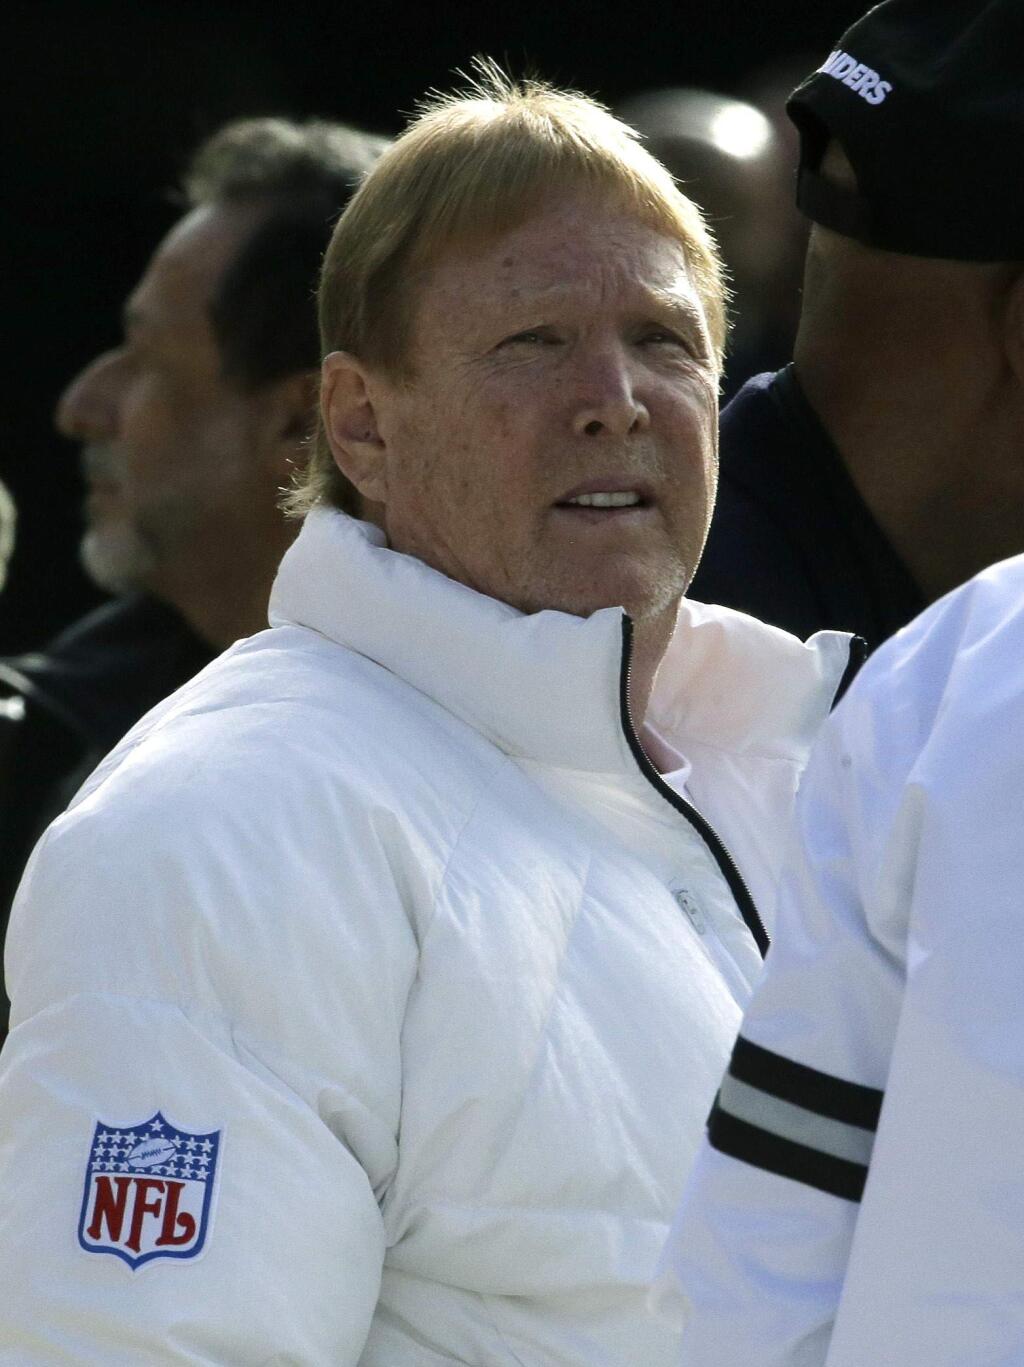 Oakland Raiders owner Mark Davis stands on the field during warmups before a game against the Denver Broncos, Sunday, Jan. 1, 2017, in Denver. (AP Photo/Joe Mahoney)